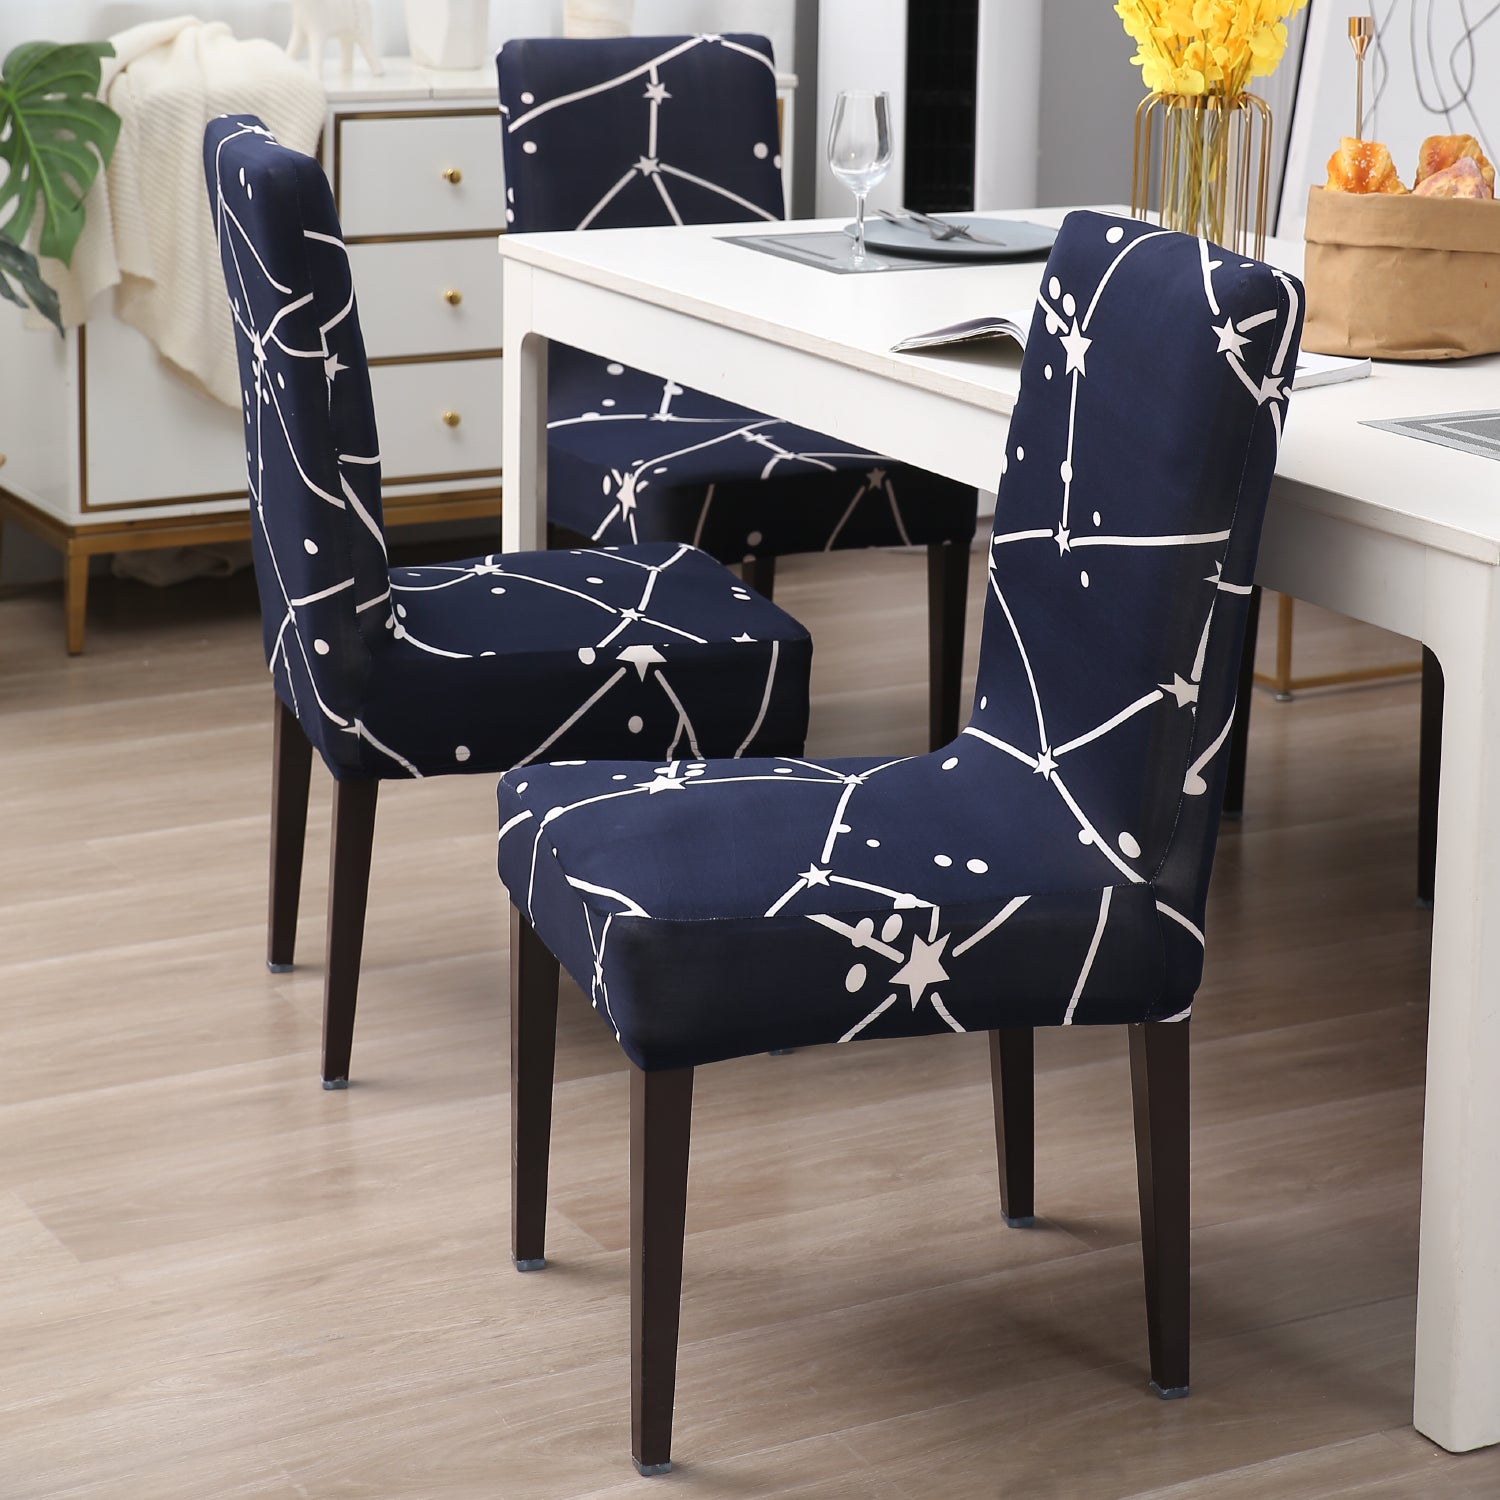 Elastic Stretchable Dining Chair Cover, Midnight Blue